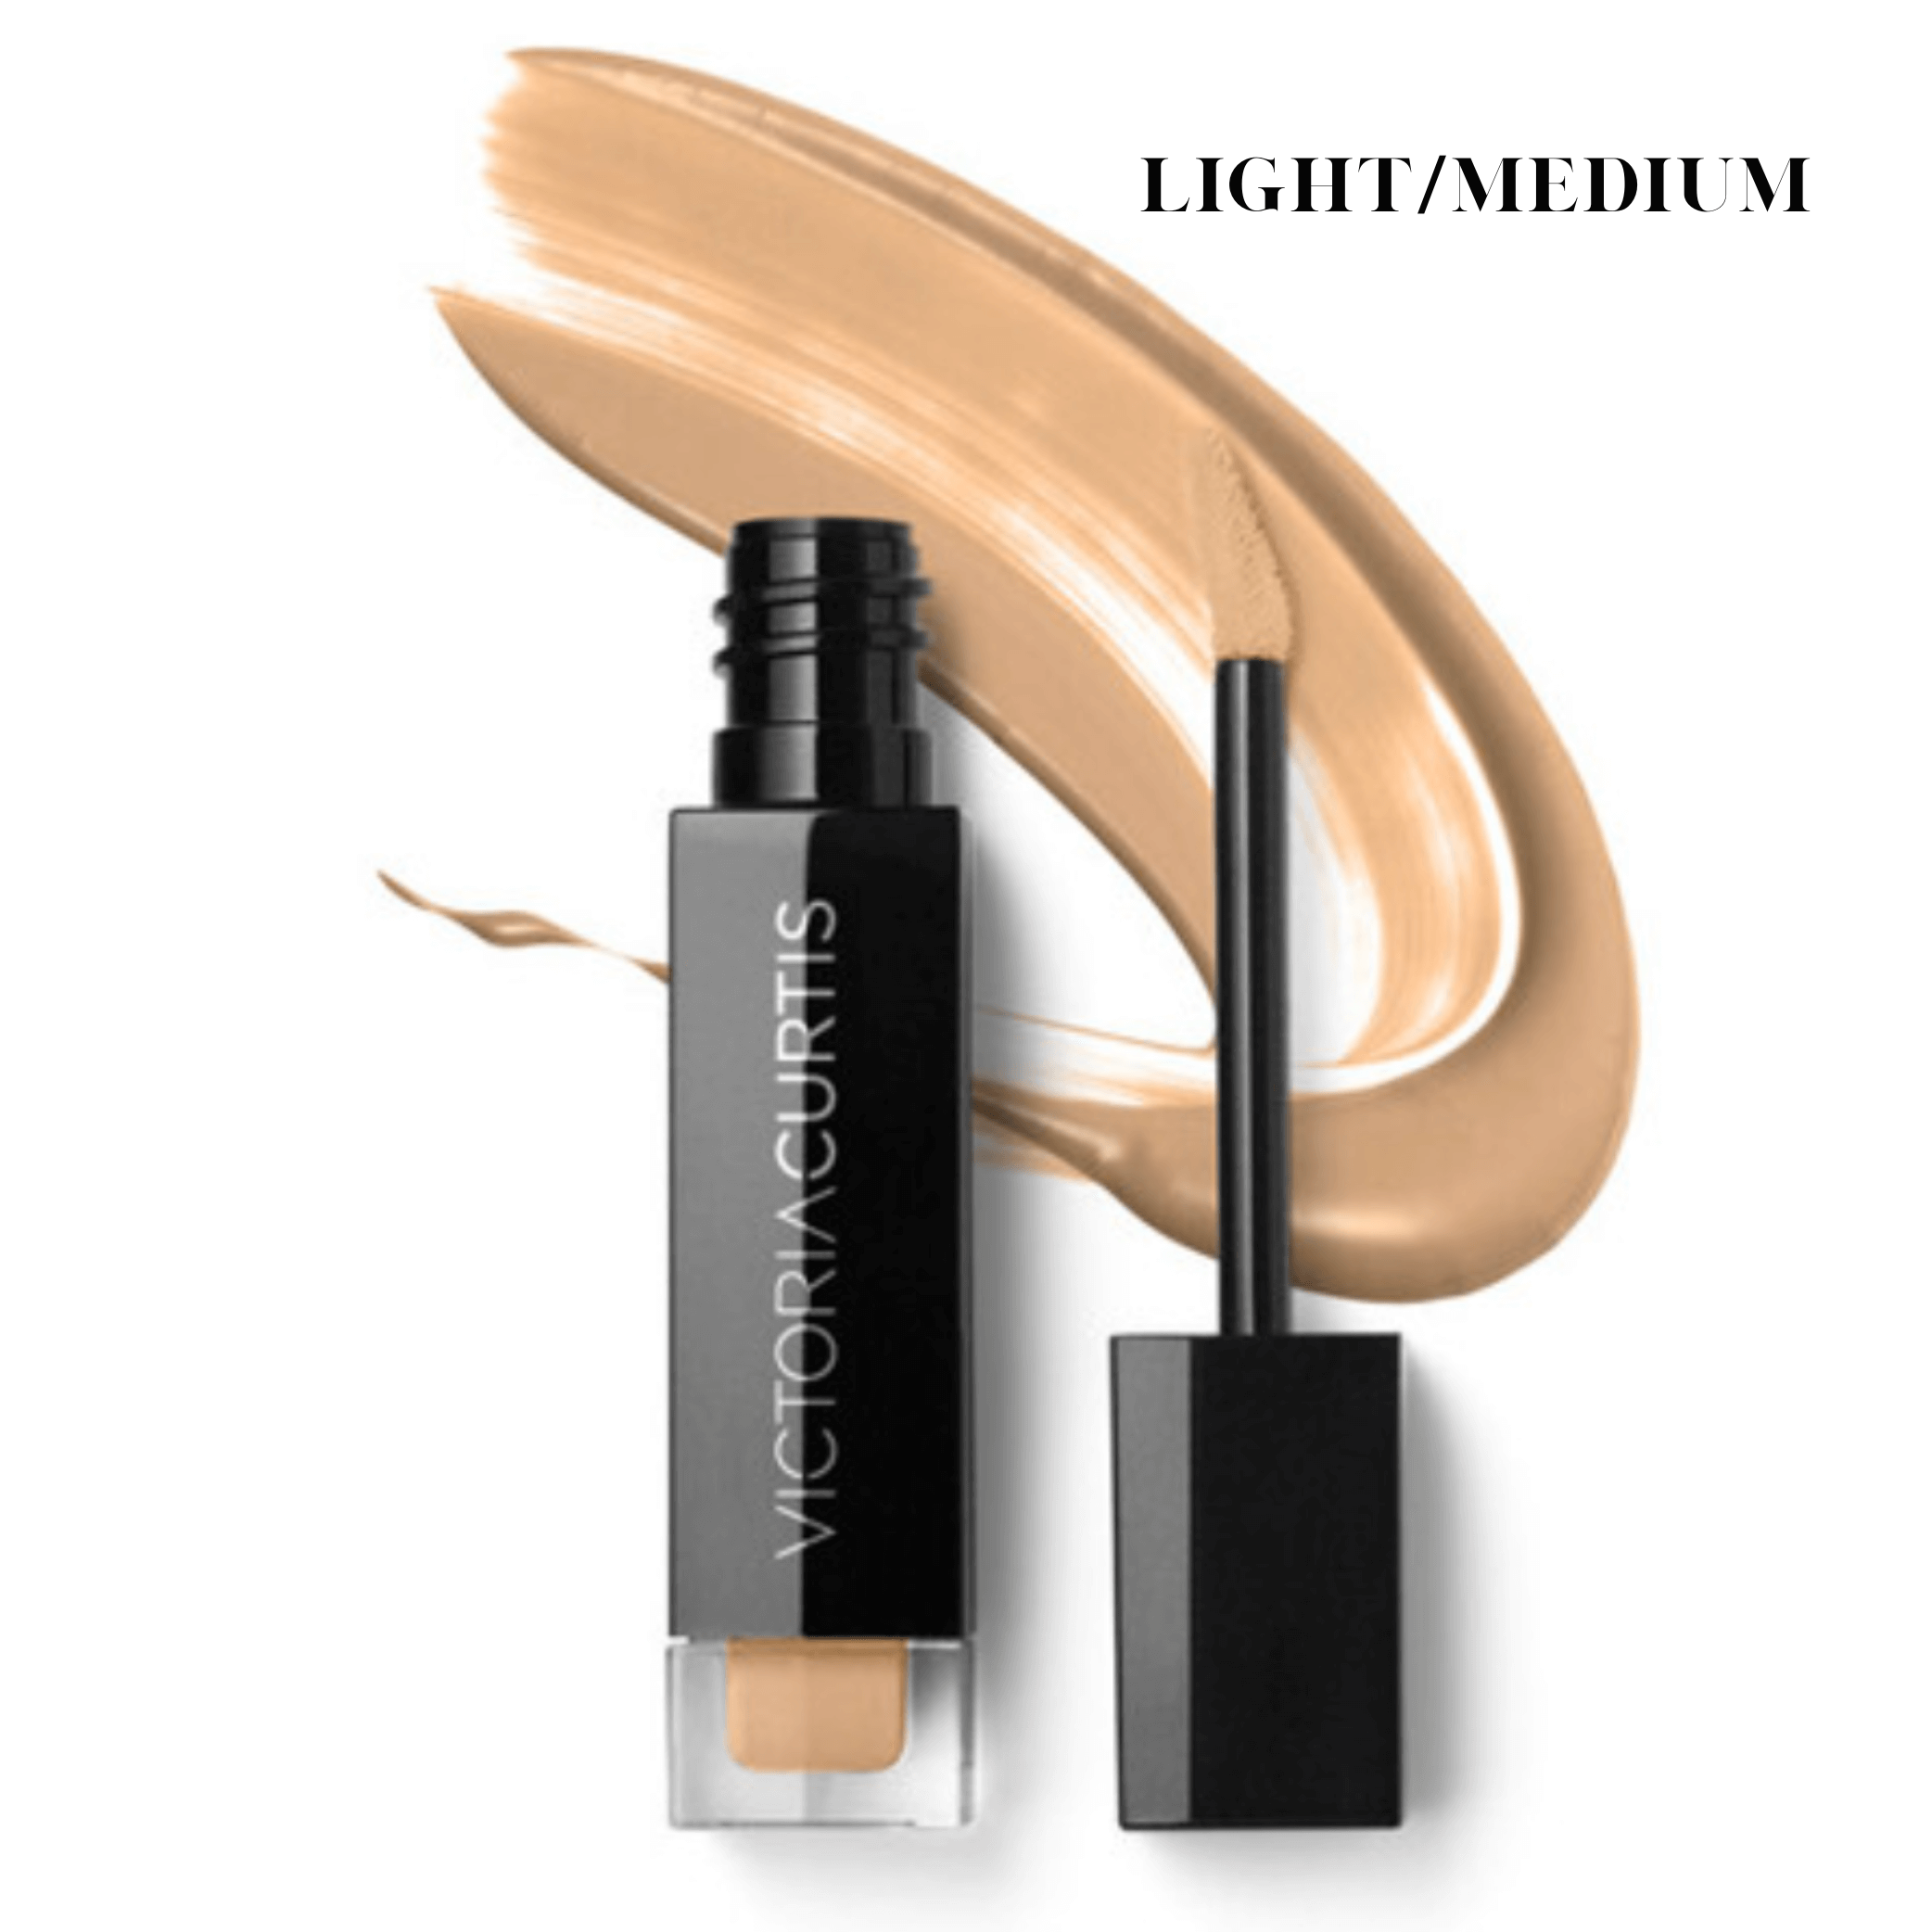 light/medium concealer by curtis collection 